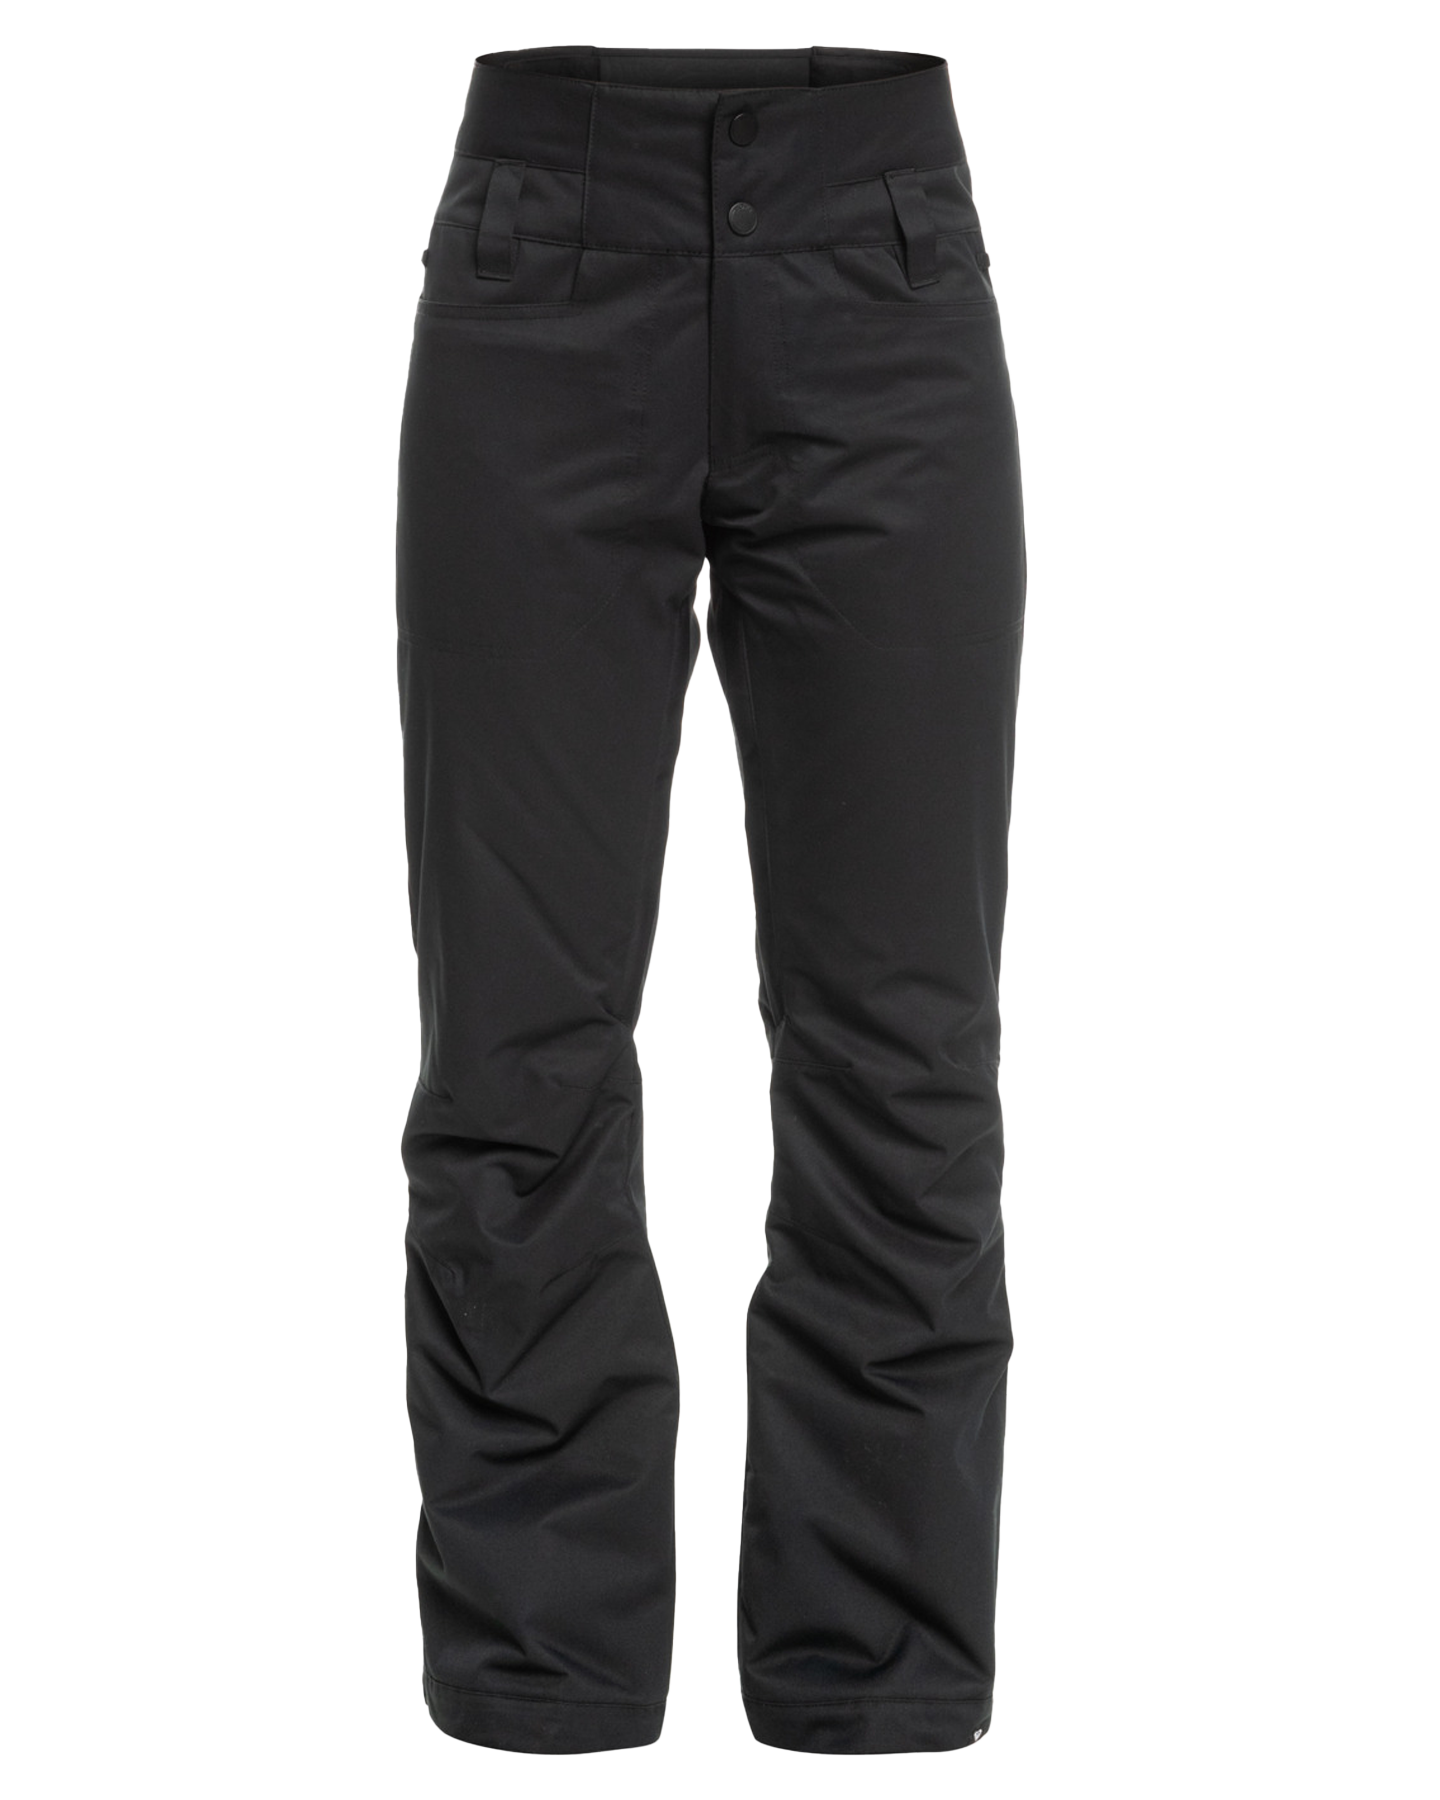 Karbon Ride Insulated Snow Pants Girls